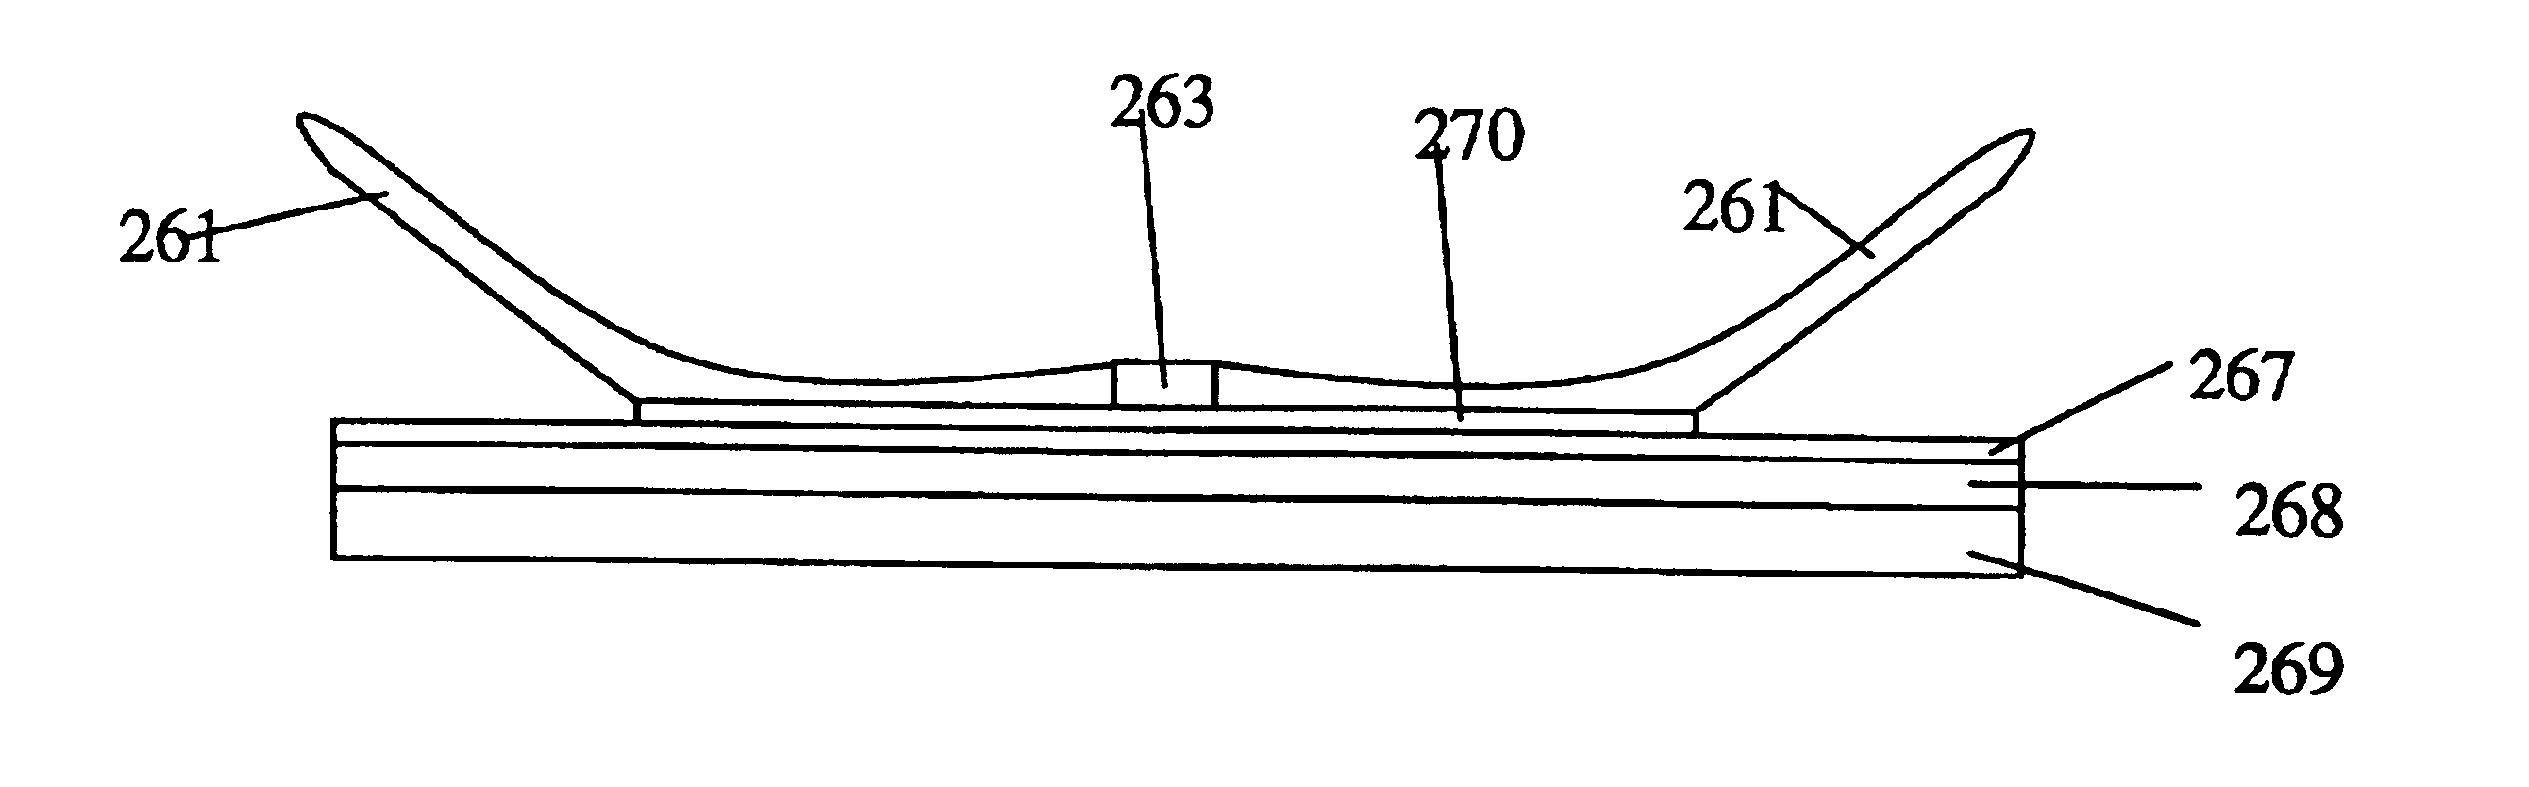 Photolithographically-patterned variable capacitor structures and method of making